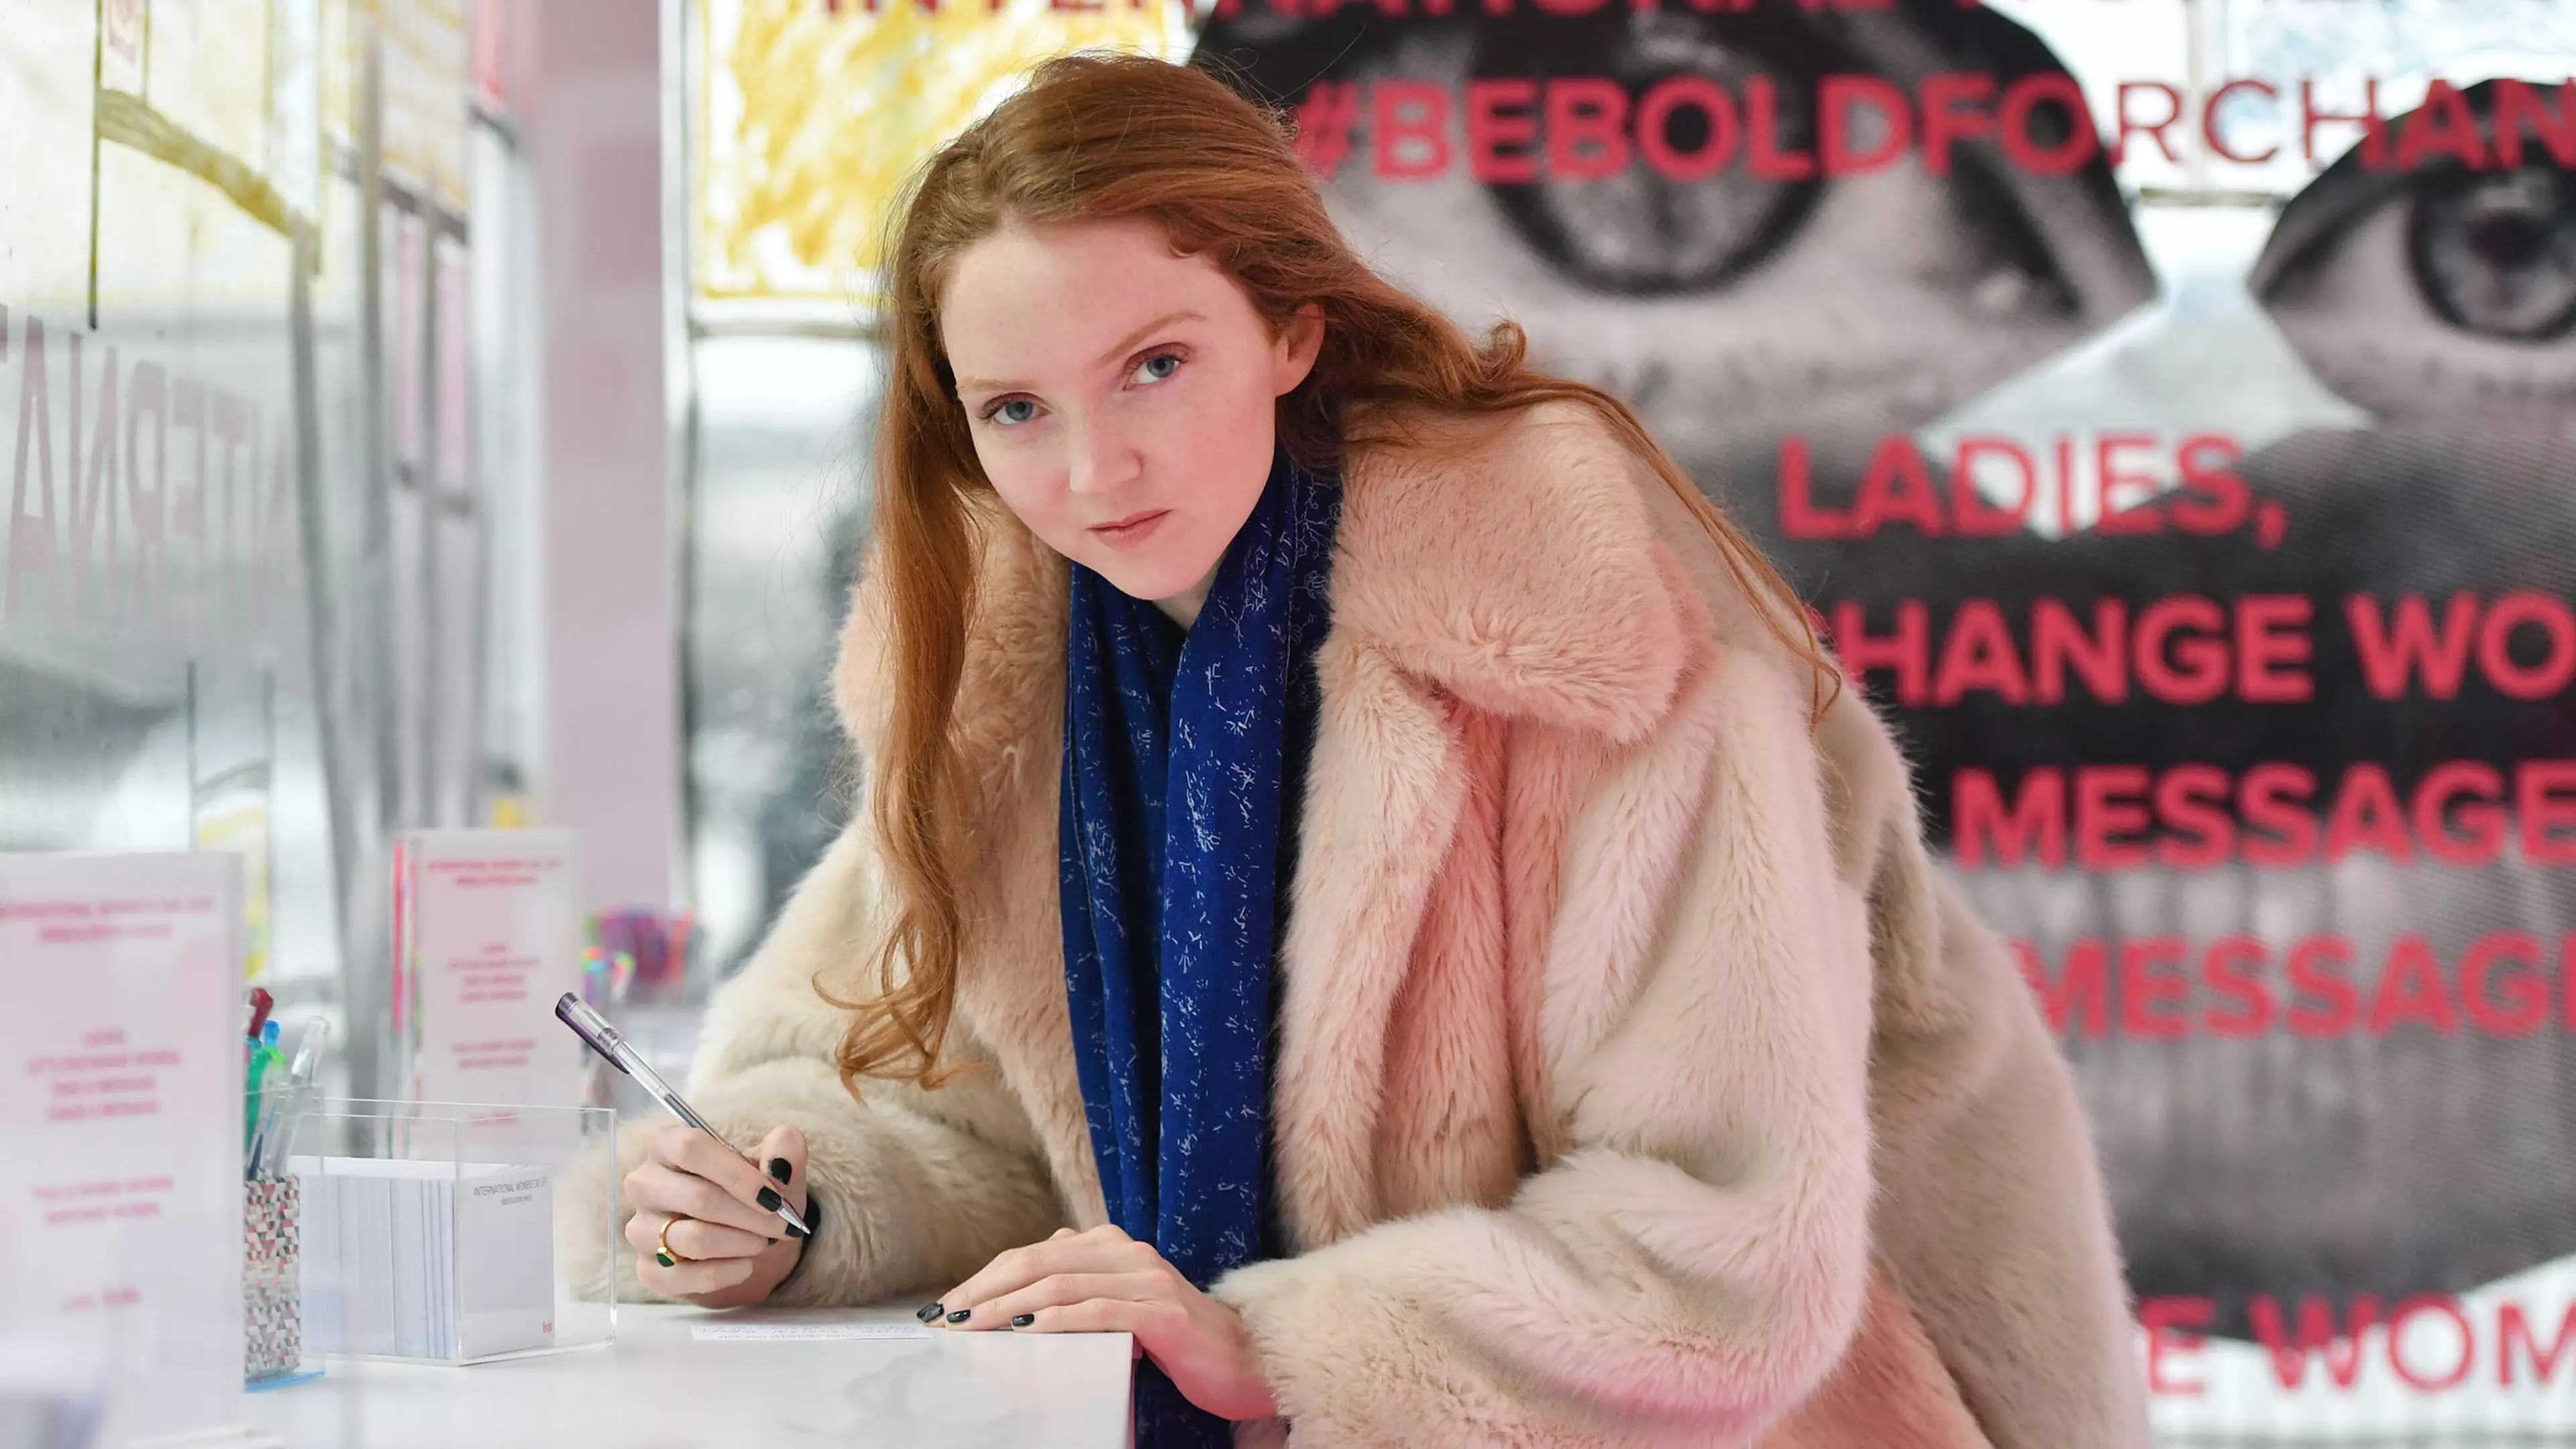 Who Is Lily Cole And What Did She Do?